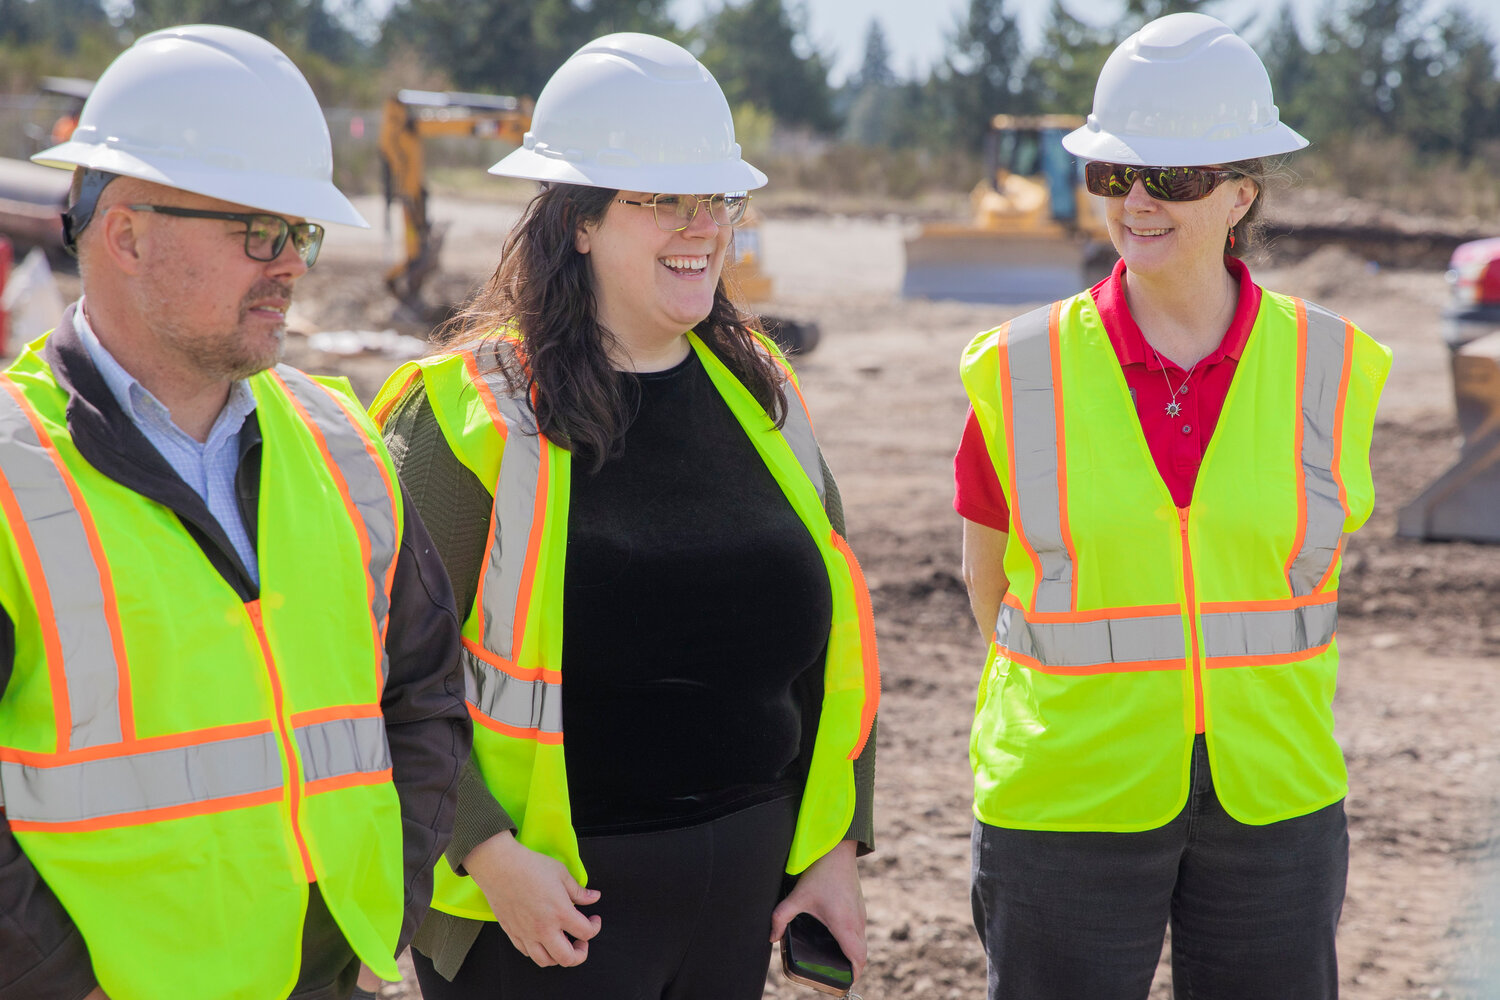 Sarah Kohout, district director for U.S. Rep. Marie Gluesenkamp Perez, D-Washougal, smiles during a tour at the construction site of an agricultural park along Old Highway 99 SE in Tenino on Thursday, April 27, 2023.